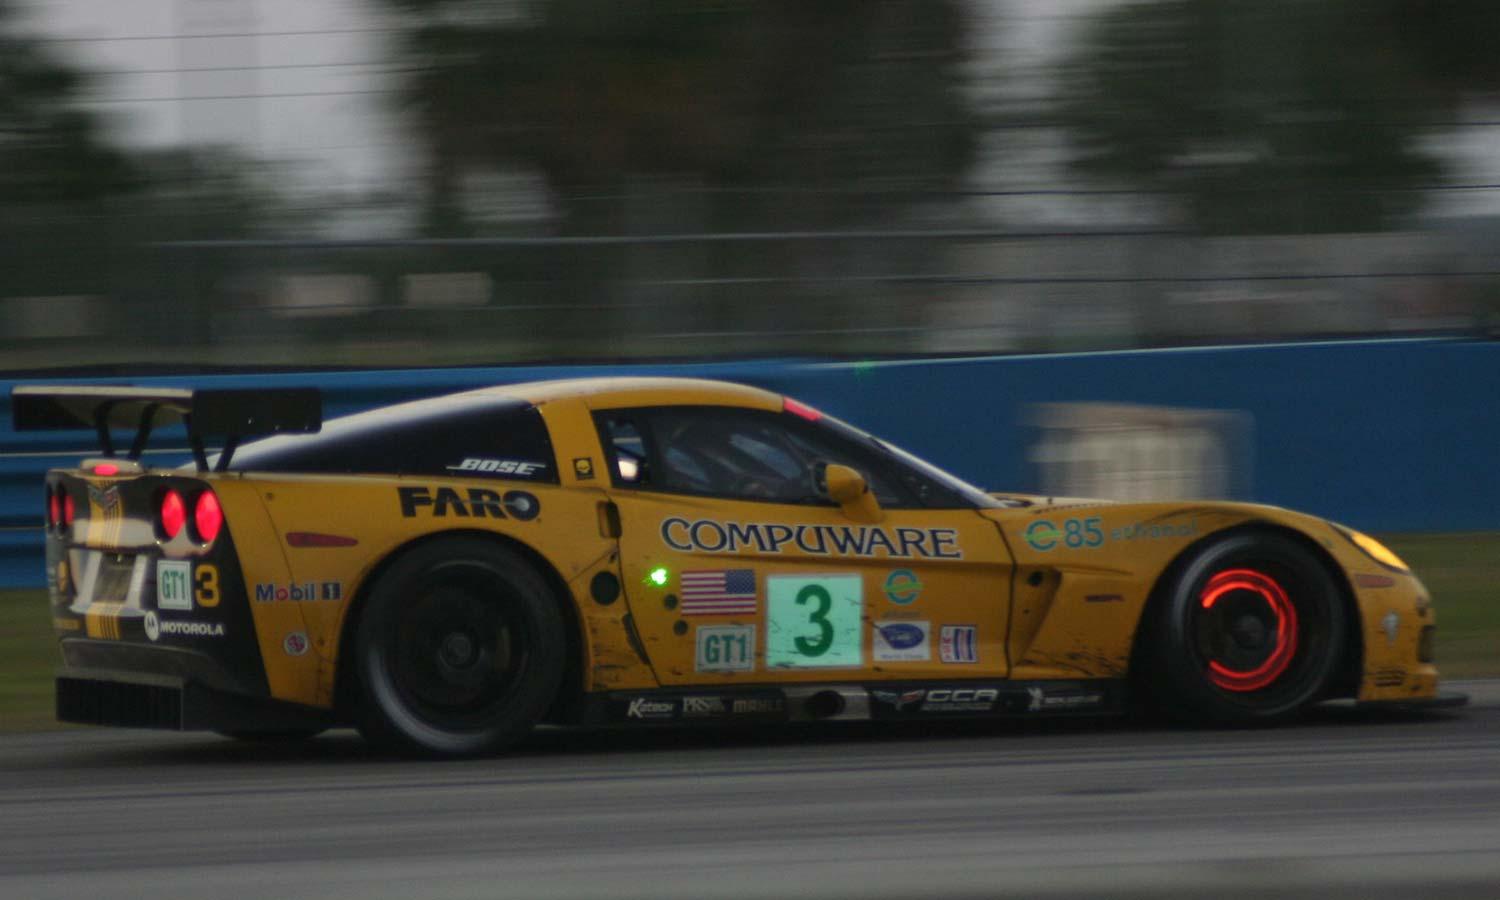 a yellow corvette with glowing brakes at the 2008 12 Hours of Sebring event